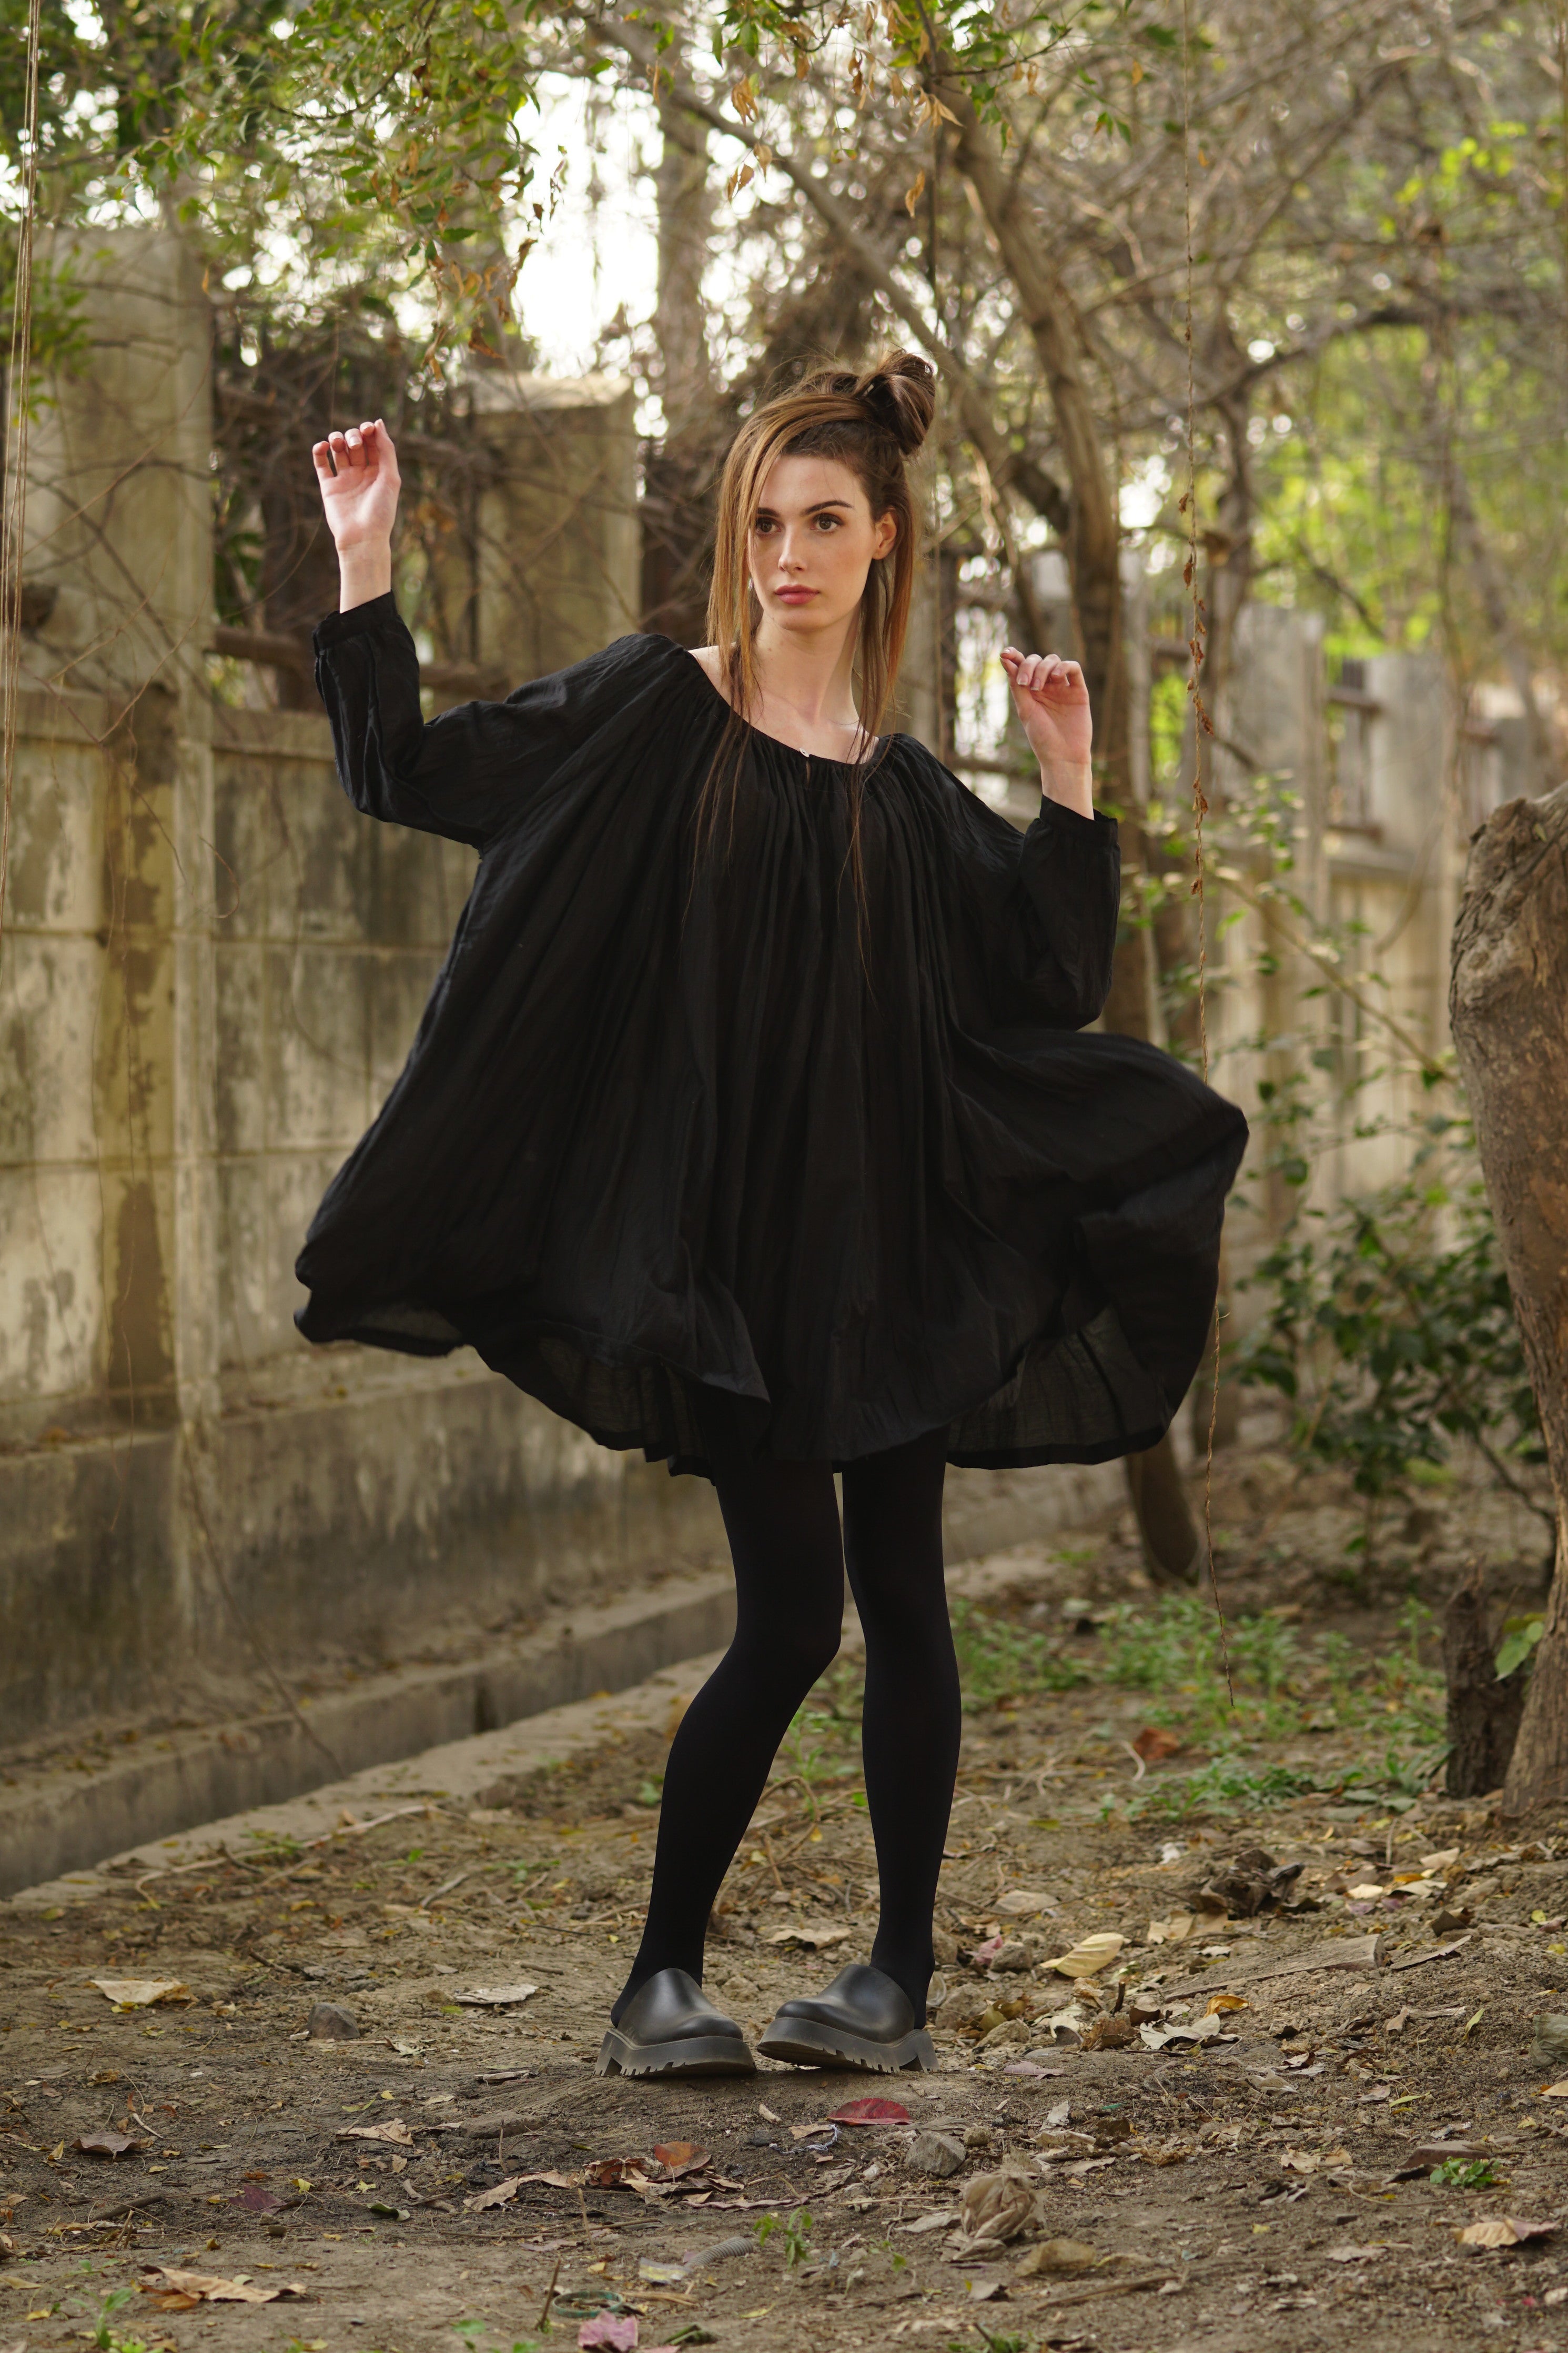 A MegbyDesign model is wearing a tunic style dress made from a soft blend of silk and cotton